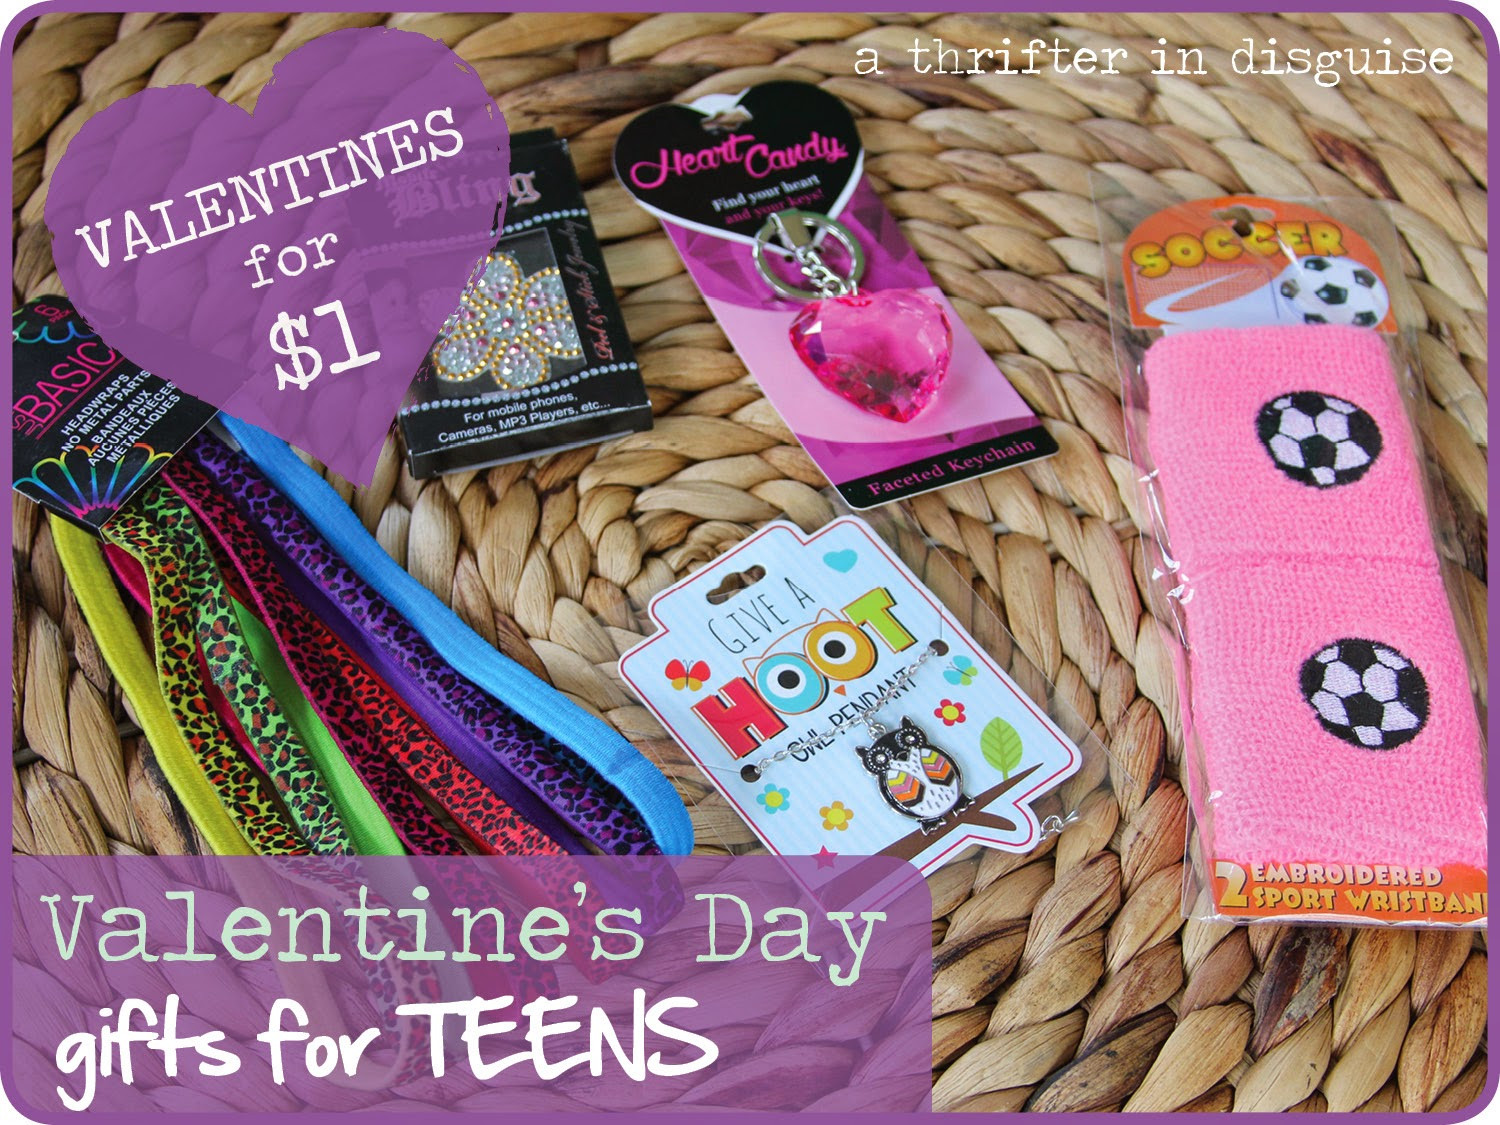 Valentines Gift Ideas For Teens
 A Thrifter in Disguise More $1 Valentine s Day Gifts